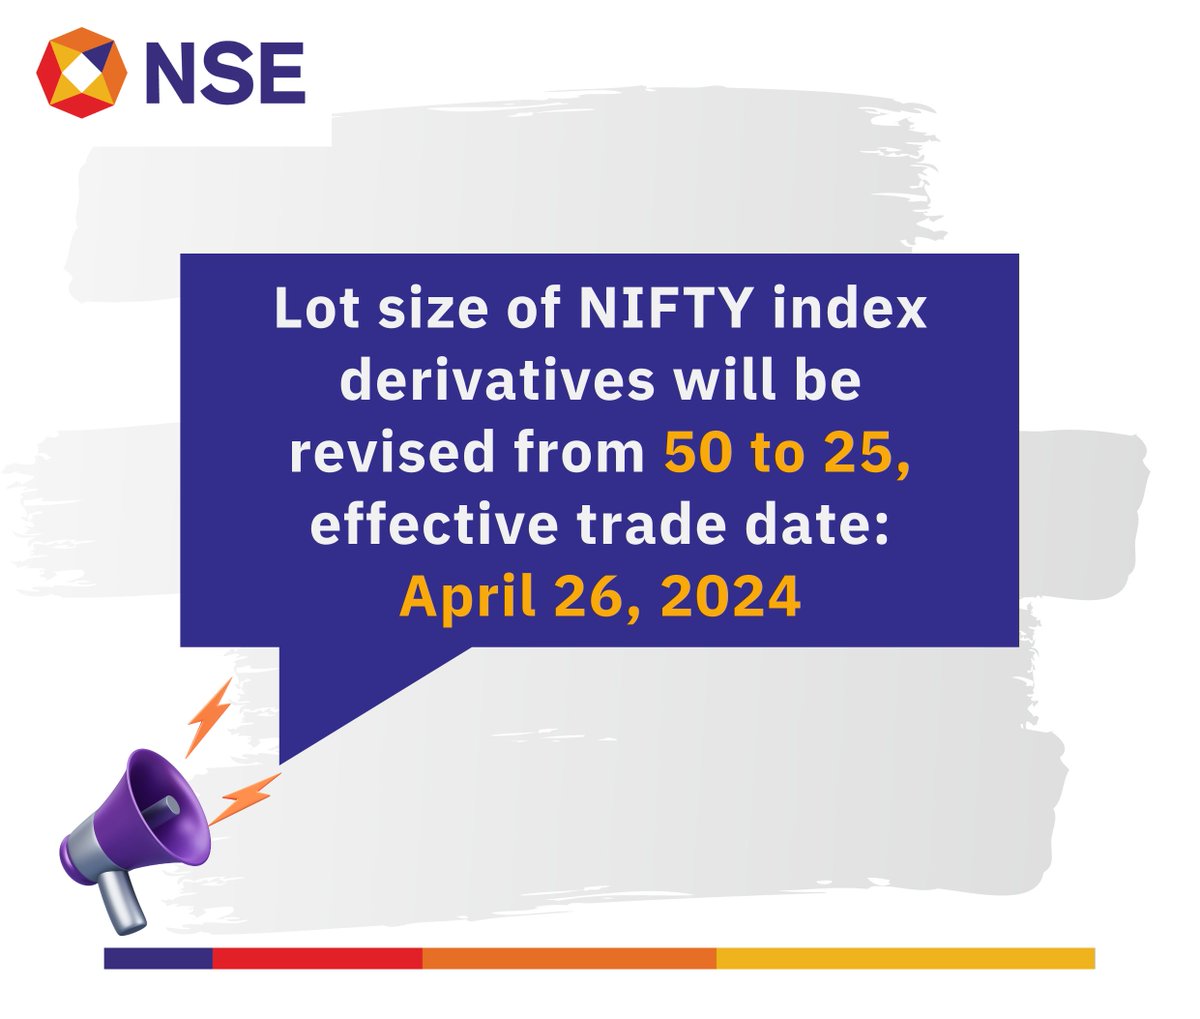 Lot size of NIFTY index derivatives will be revised from 50 to 25, effective from April 26, 2024. For more details refer circular - bit.ly/4bbigyl #NSEIndia #NIFTY #NIFTYINDEXDERIVATIVES @ashishchauhan